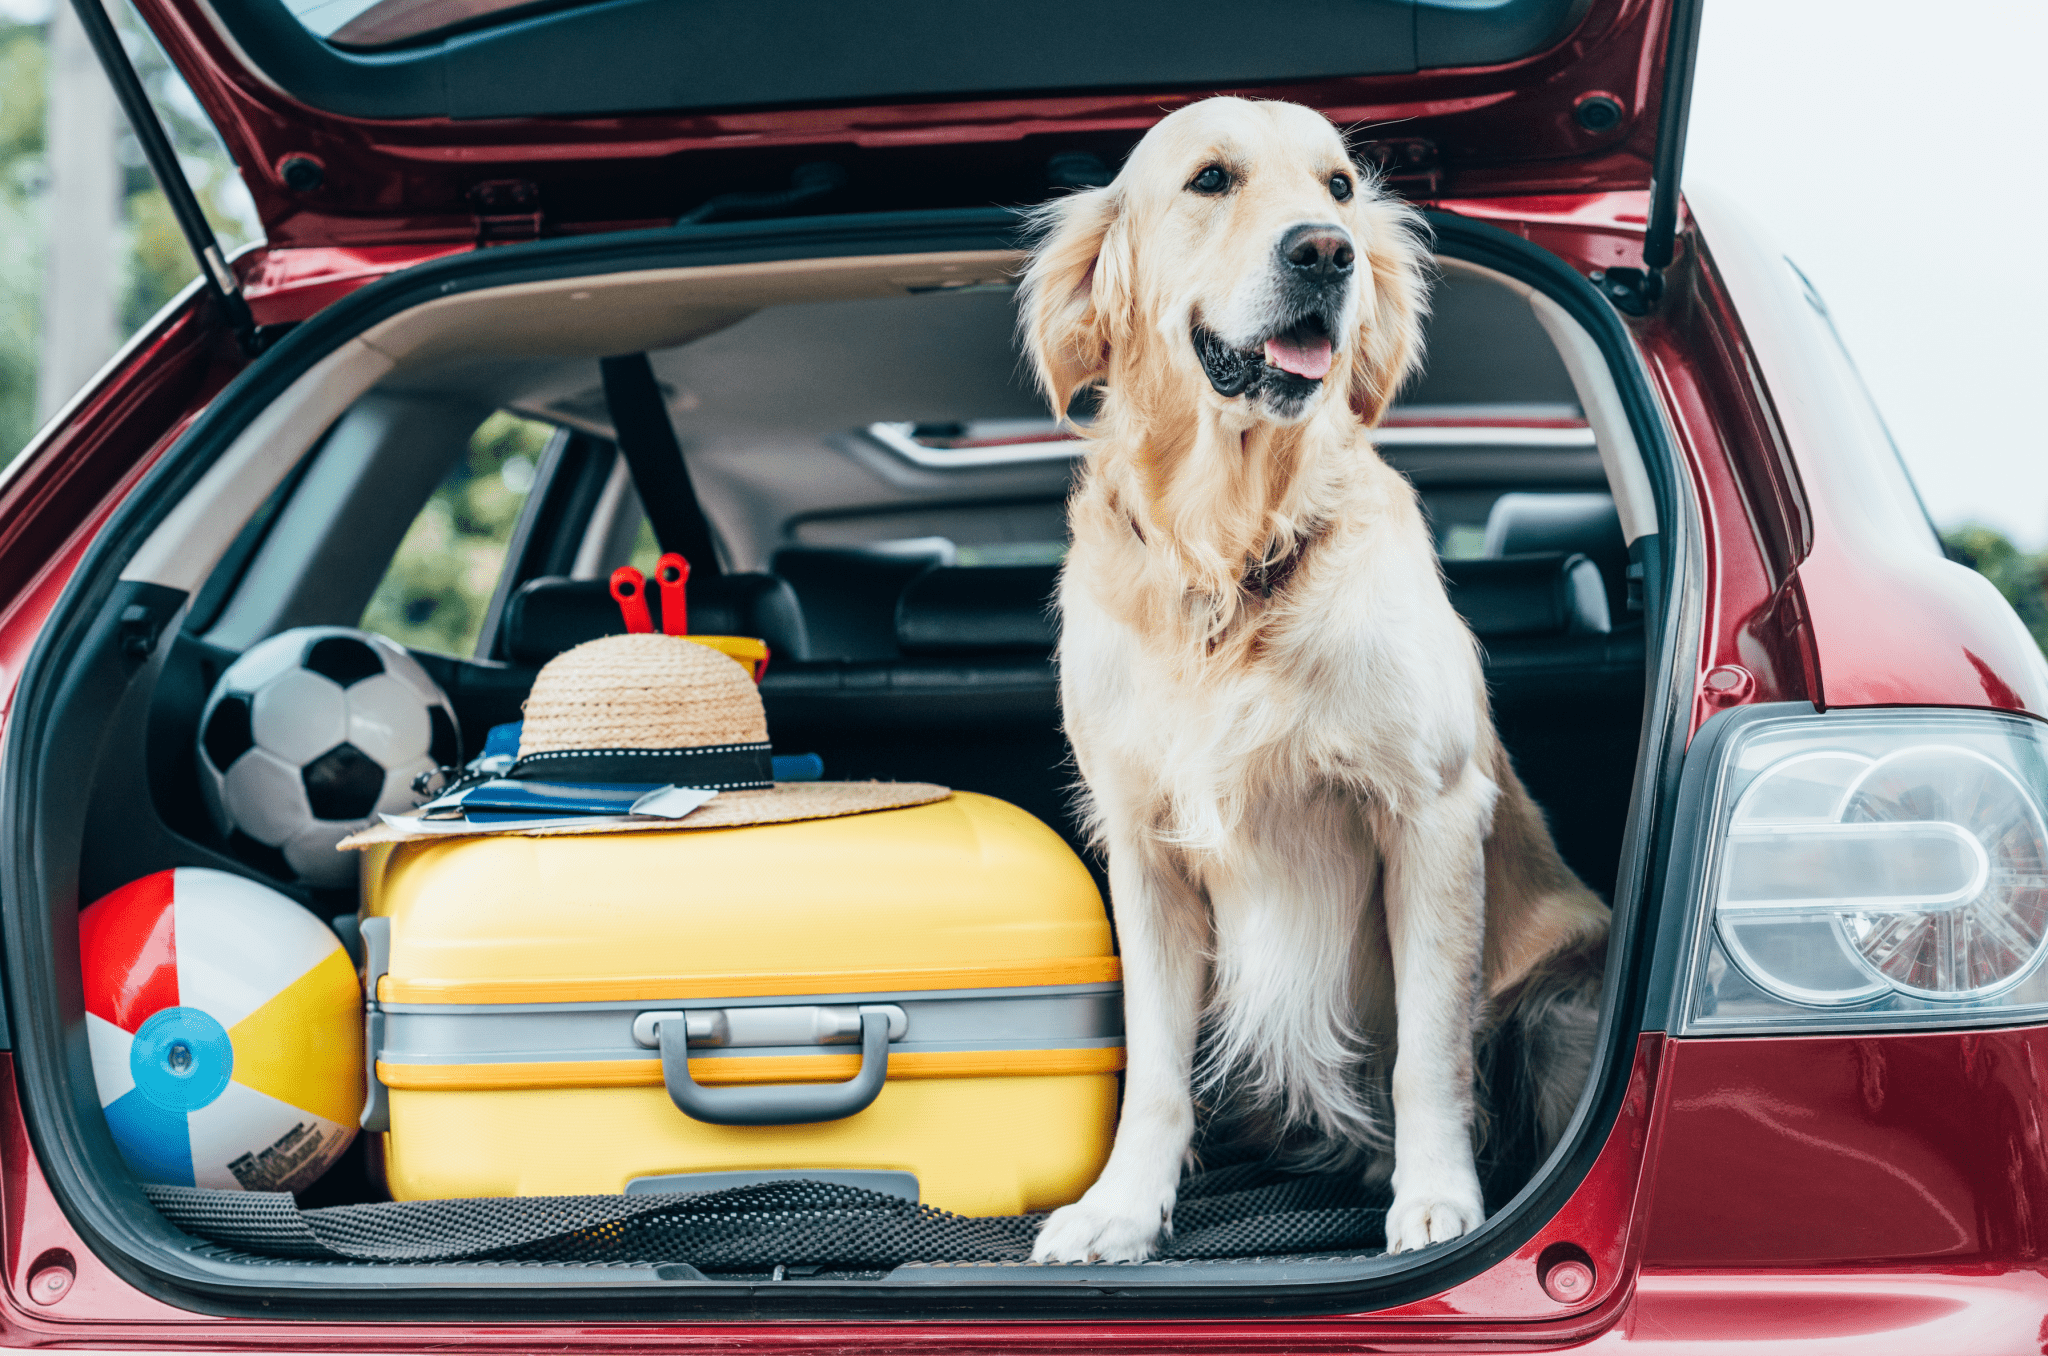 How to Prepare for the Ultimate Dog-Friendly Road Trip